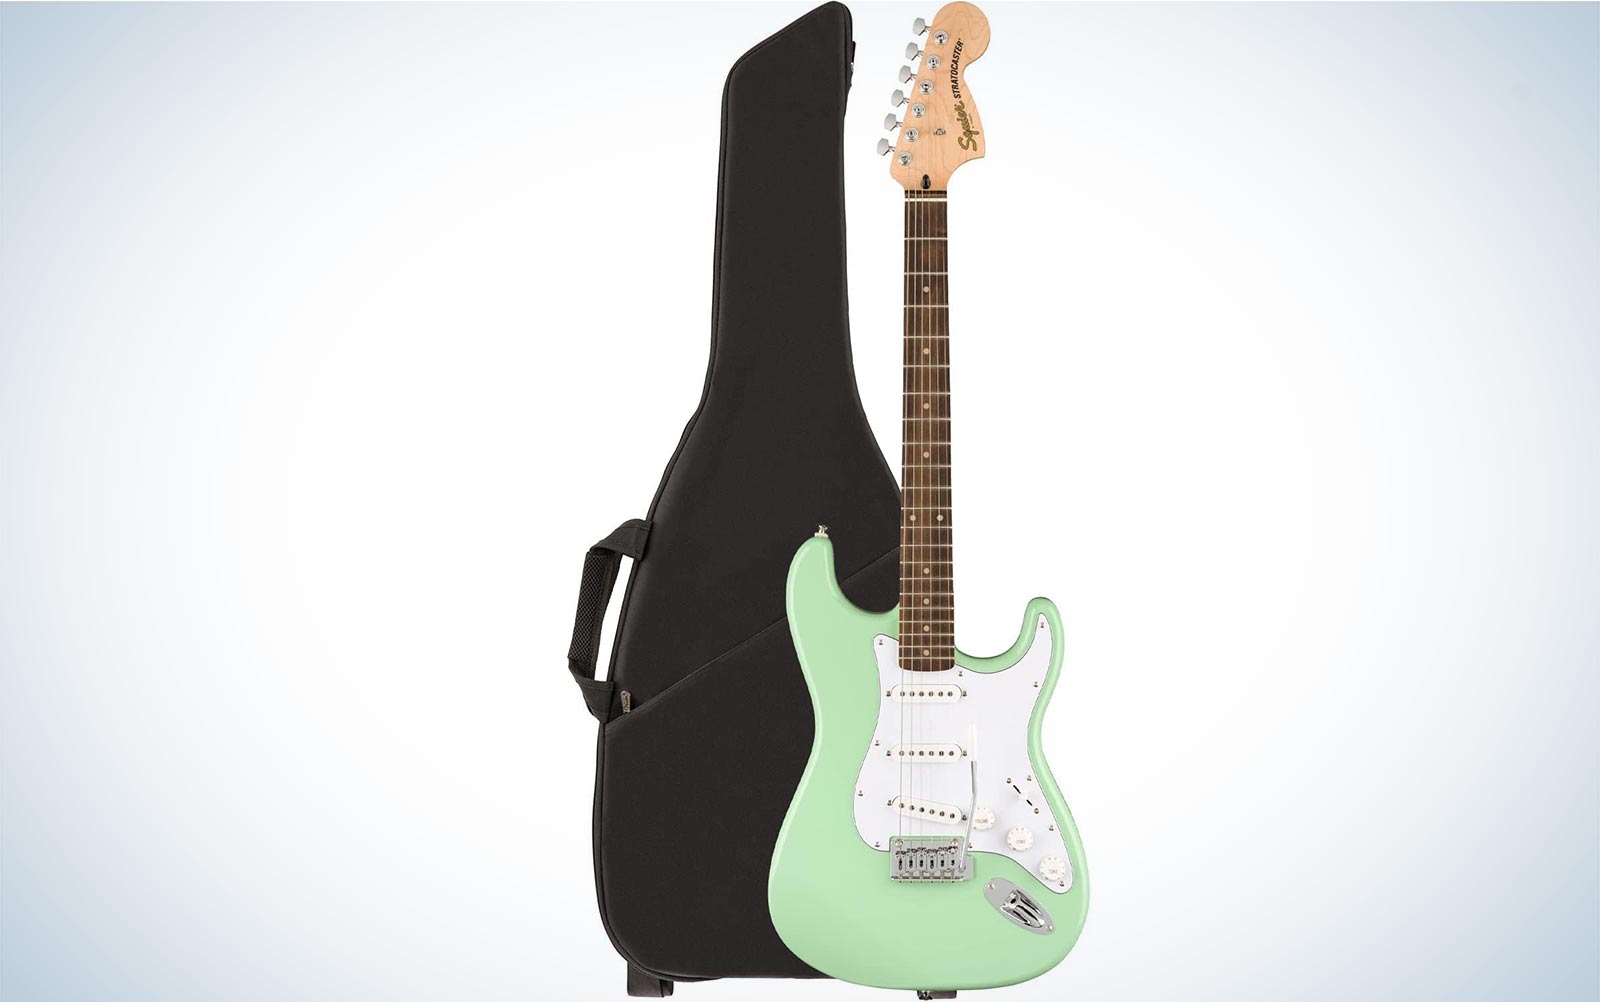 A light green Fender Squier Affinity Stratocaster Limited Edition guitar with its case on a plain background